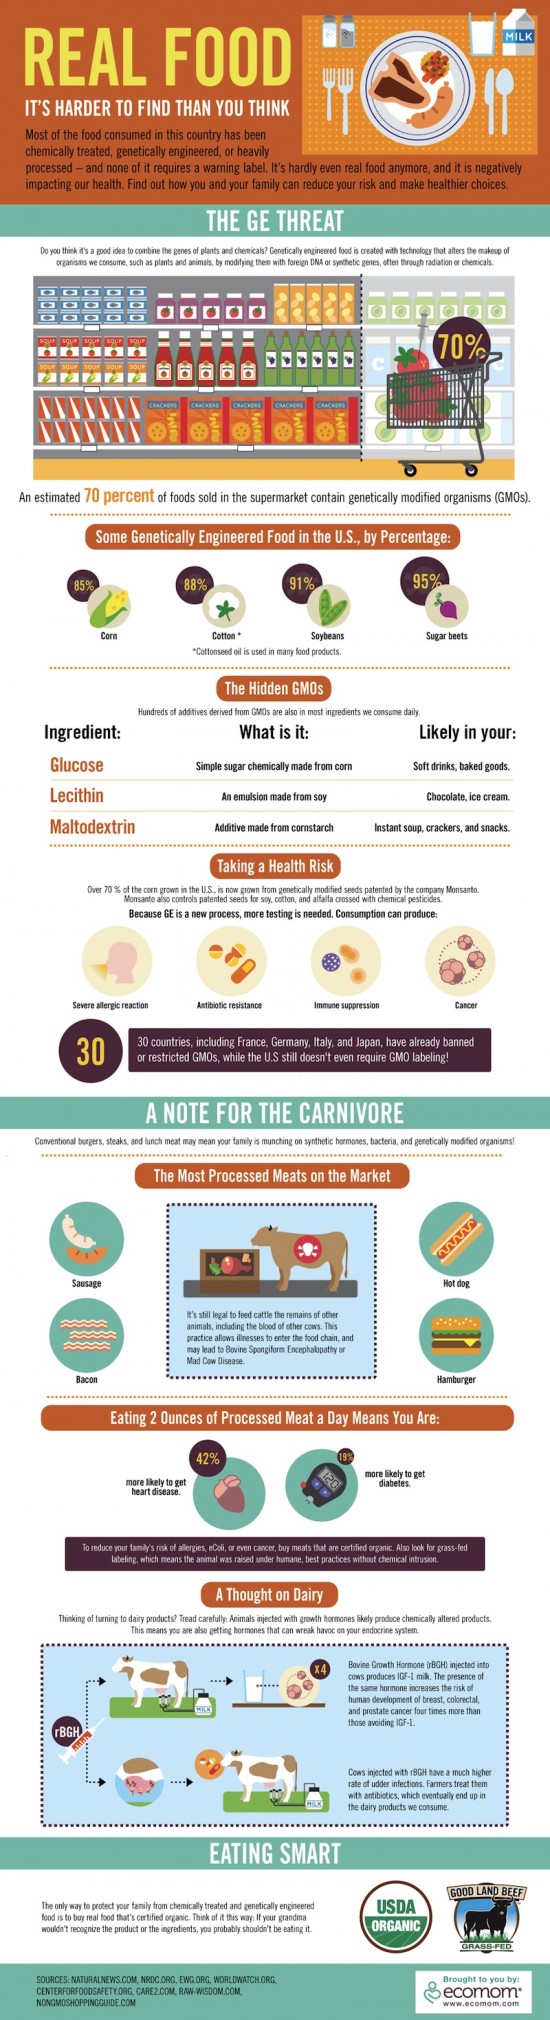 Real-Food-Infographic